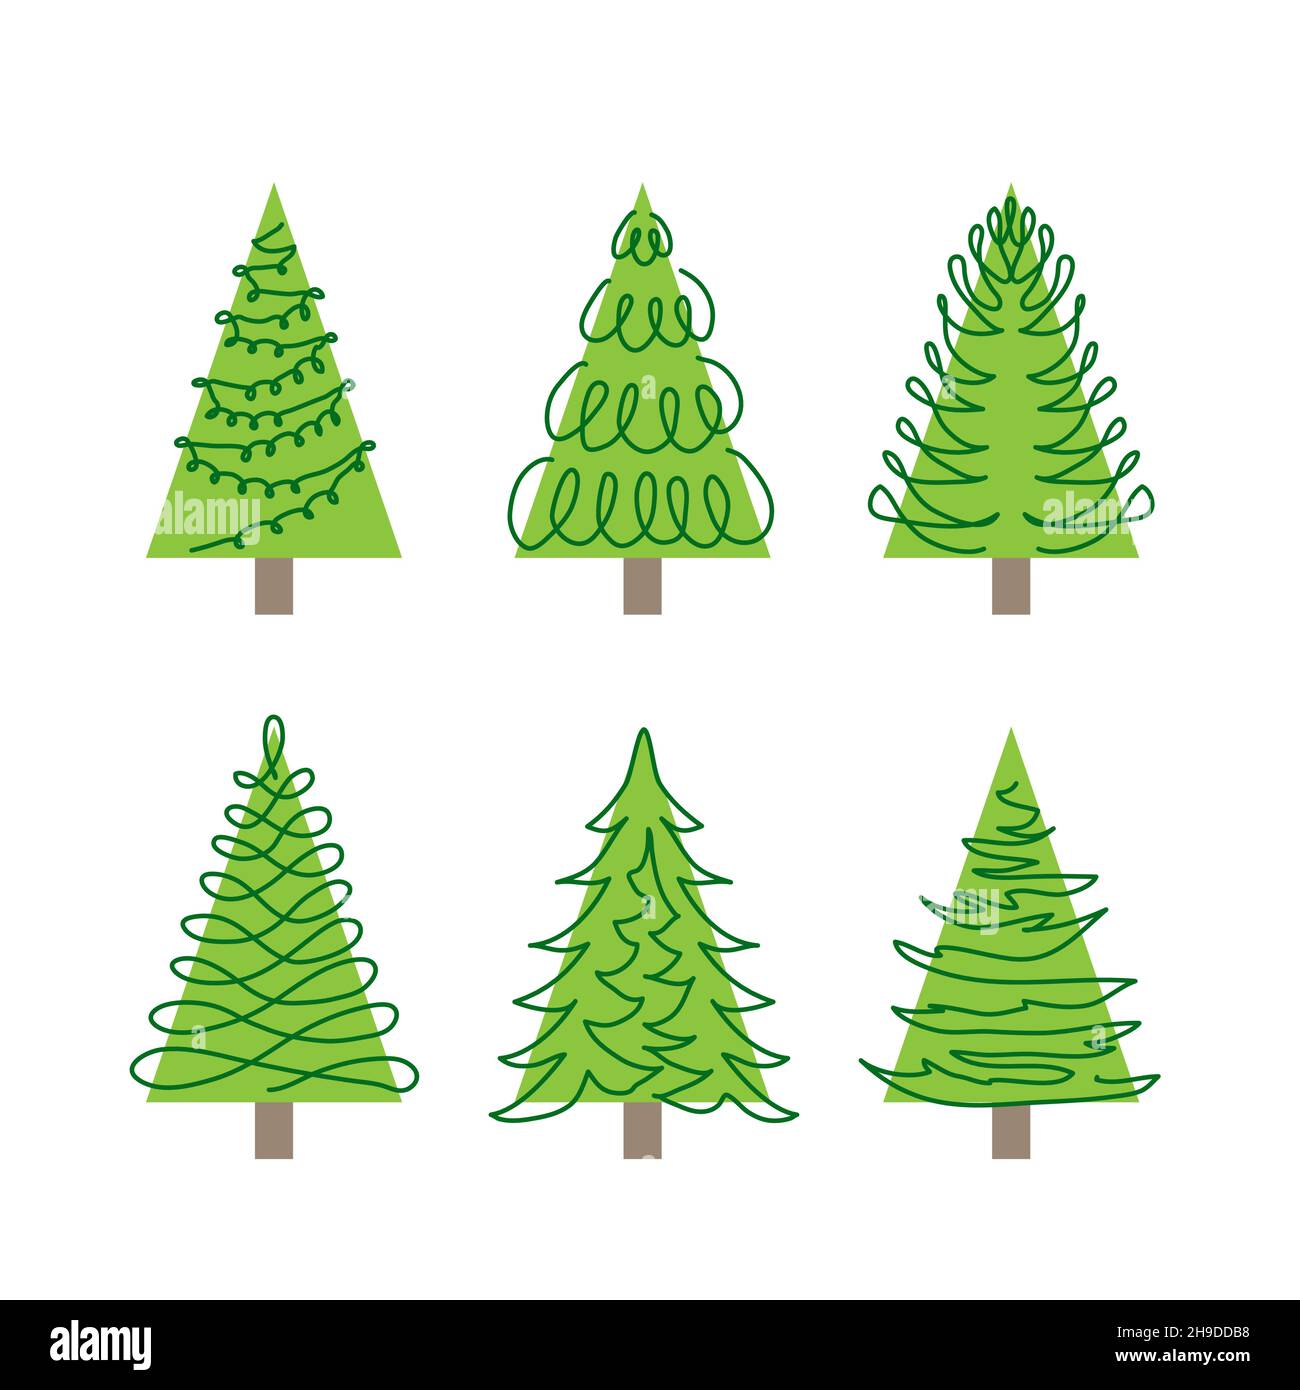 Doodle vector pine trees set. One continuous line drawing art. Simple green Christmas trees, pine trees, fir set Stock Vector